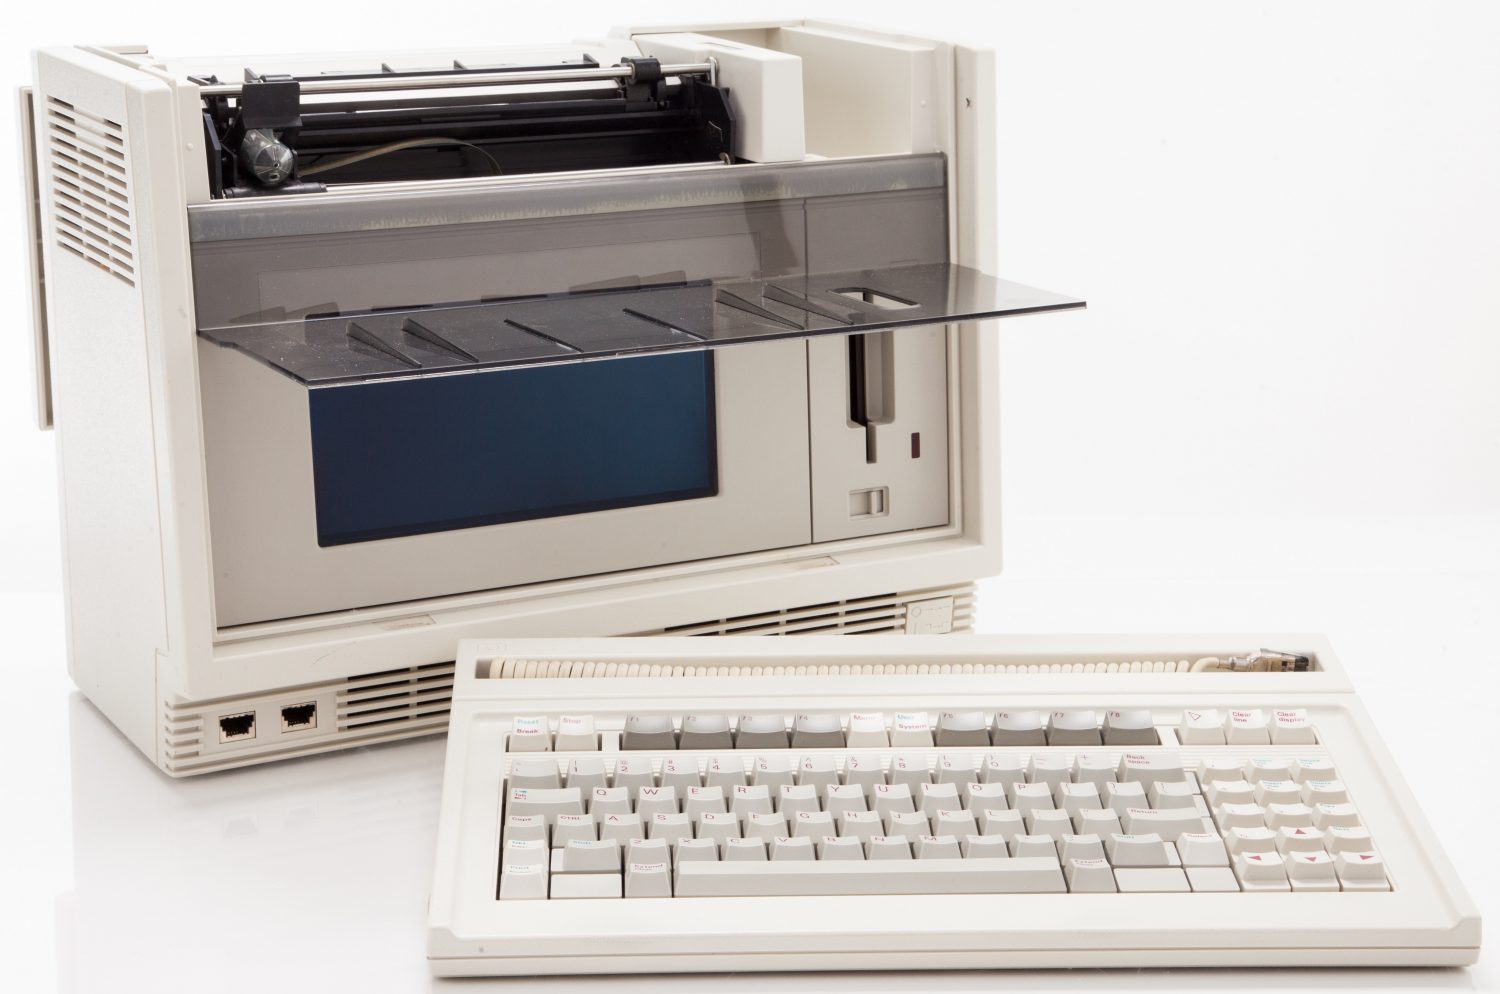 The HP 9807A Integral PC with a built-in printer, disk drive and separate keyboard.